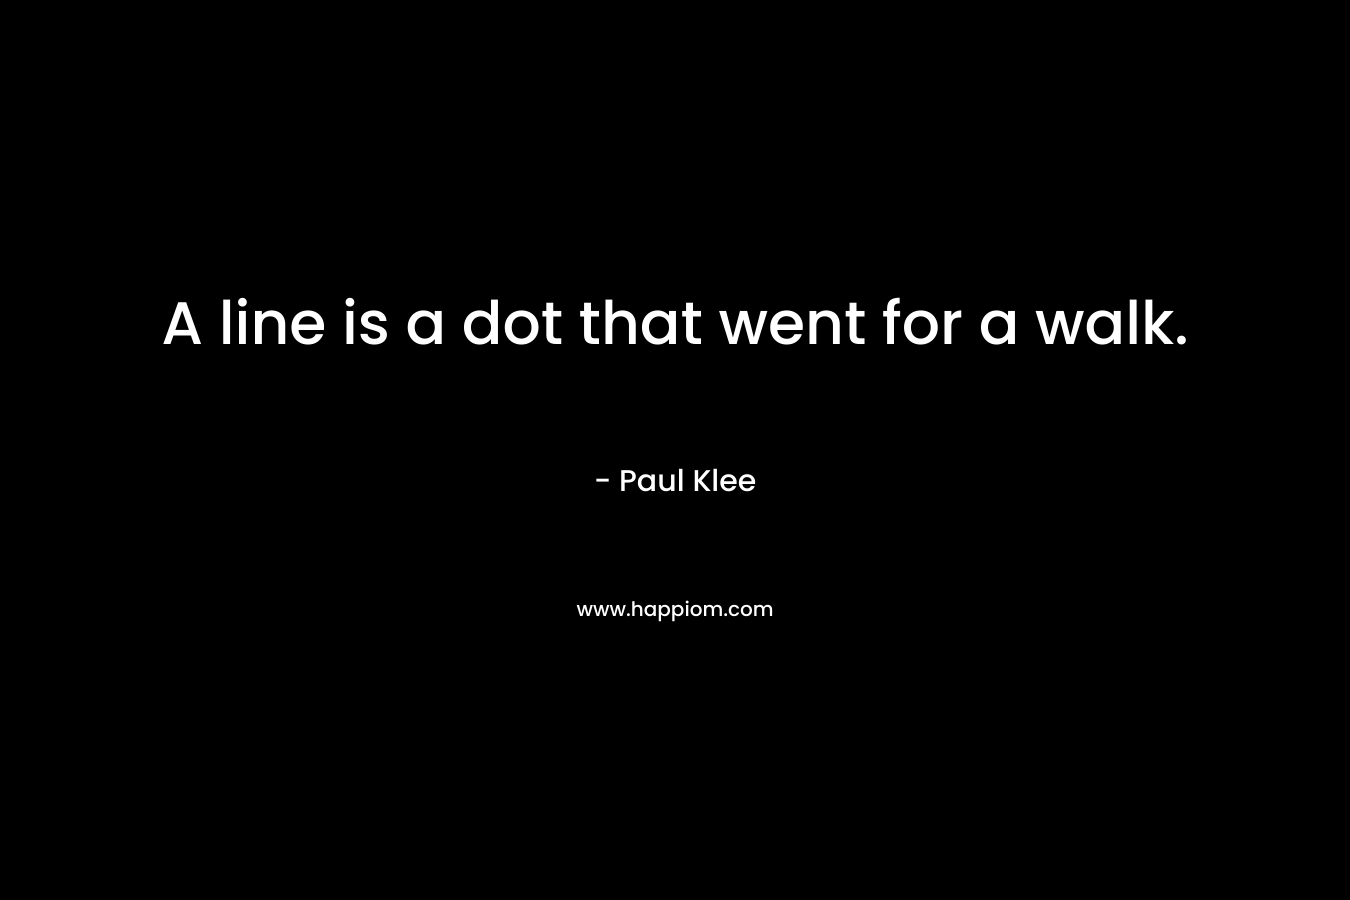 A line is a dot that went for a walk. – Paul Klee